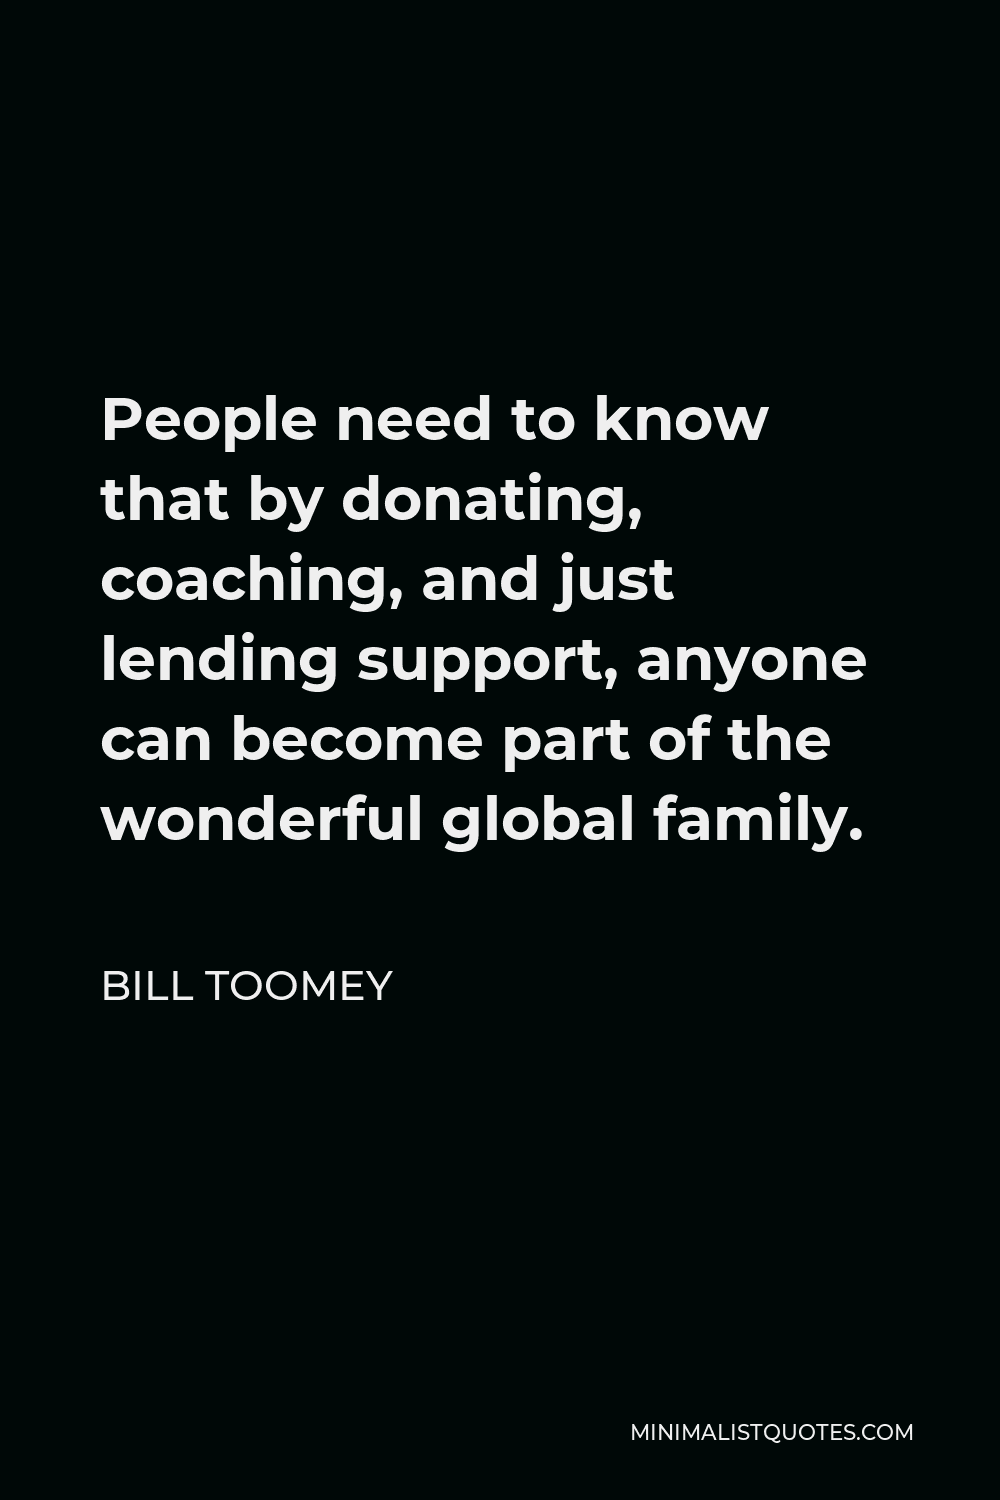 Bill Toomey Quote - People need to know that by donating, coaching, and just lending support, anyone can become part of the wonderful global family.